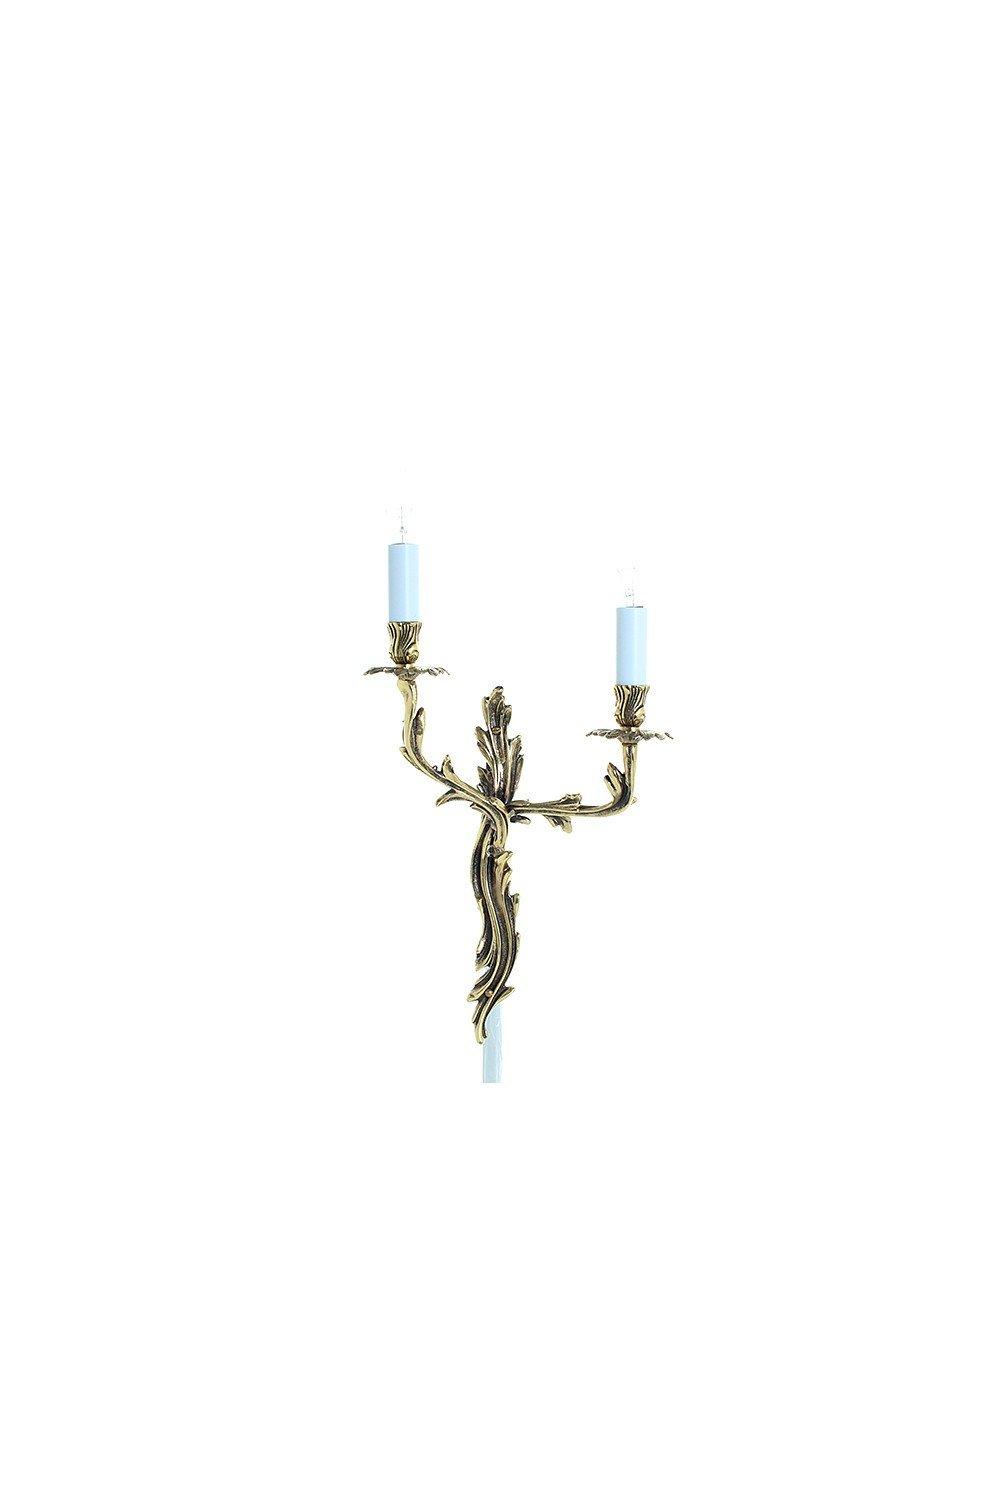 Louis Polished Brass Candle Wall Lamp